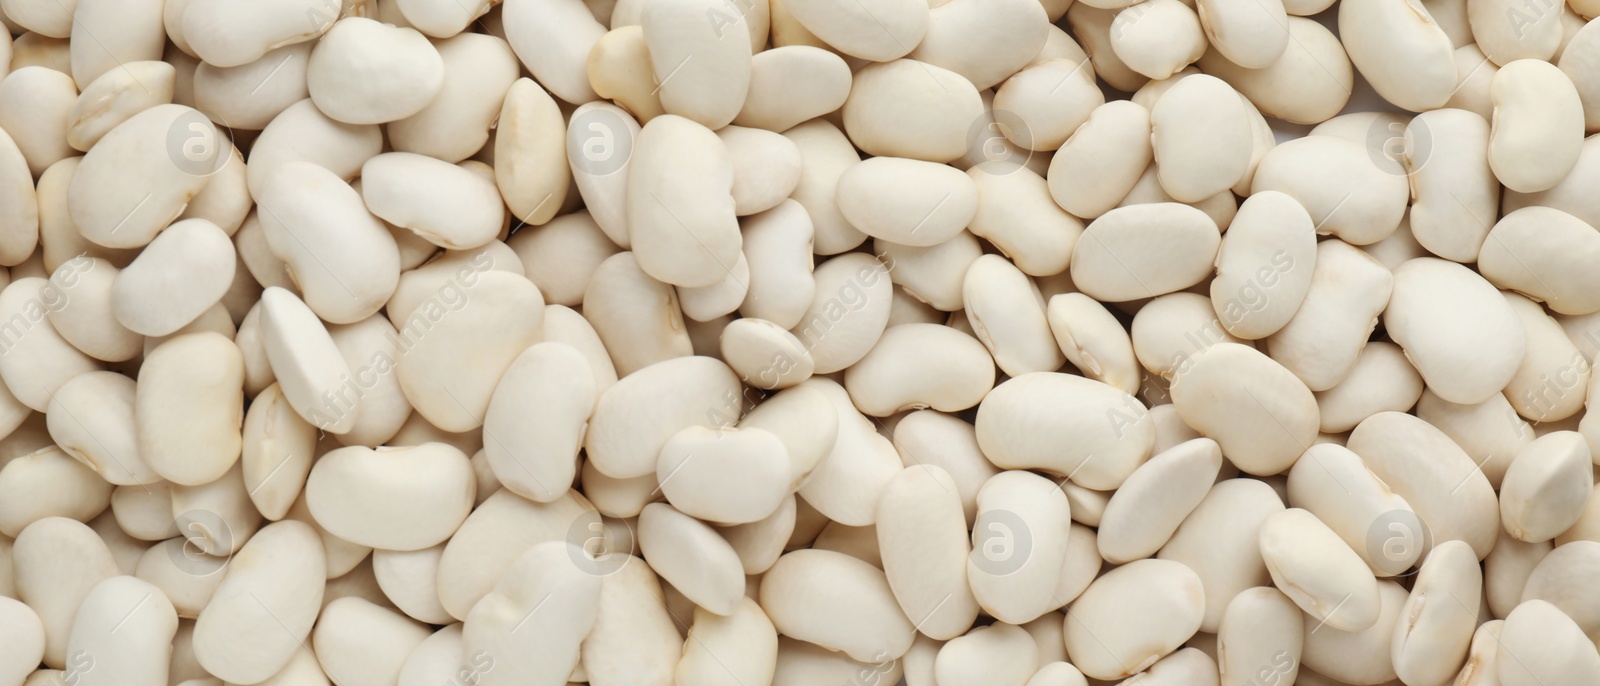 Image of White beans as background, top view. Banner design